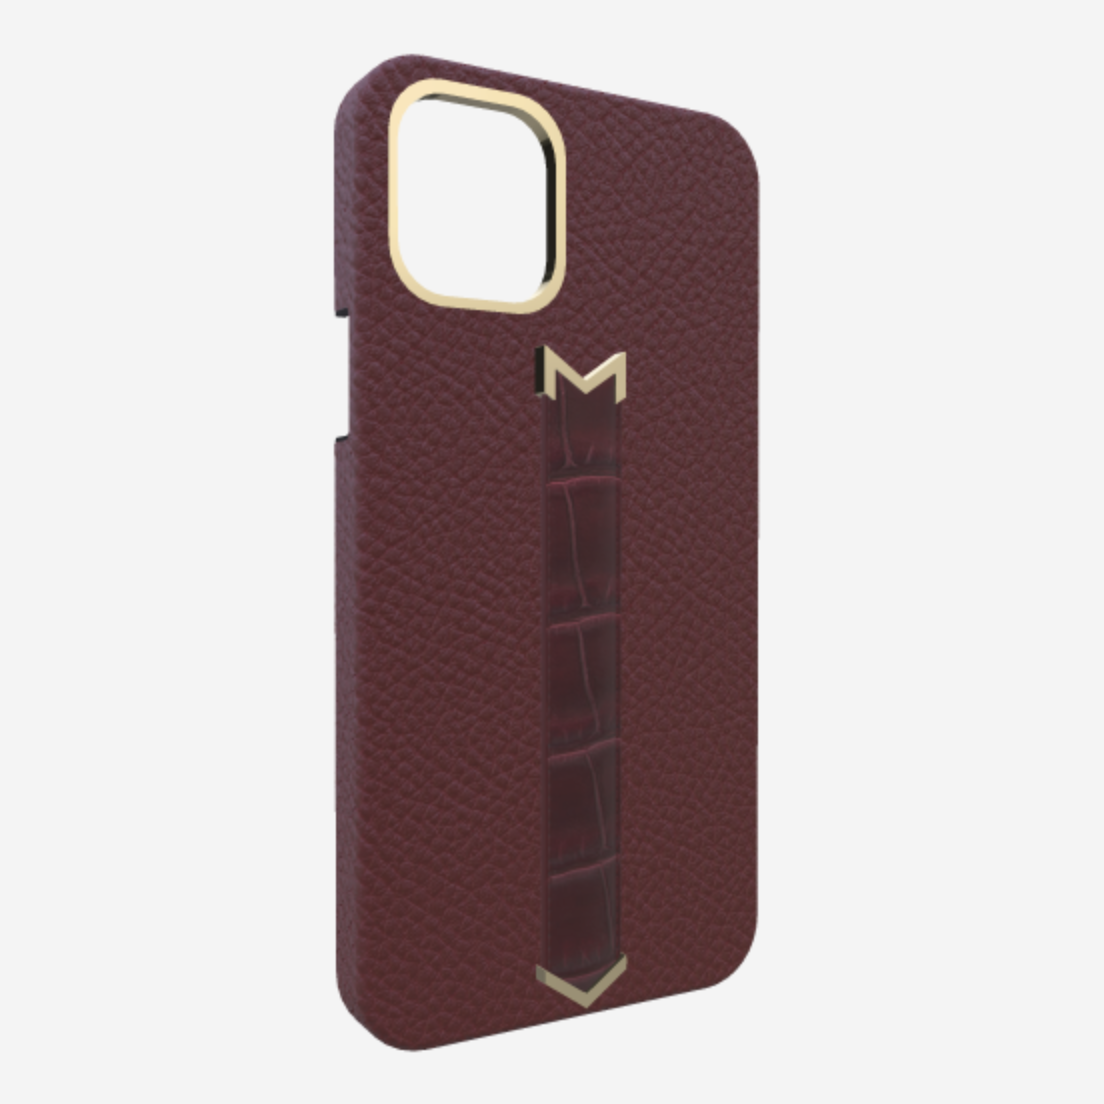 Gold Finger Strap Case for iPhone 13 in Genuine Calfskin and Alligator Burgundy Palace Burgundy Palace 